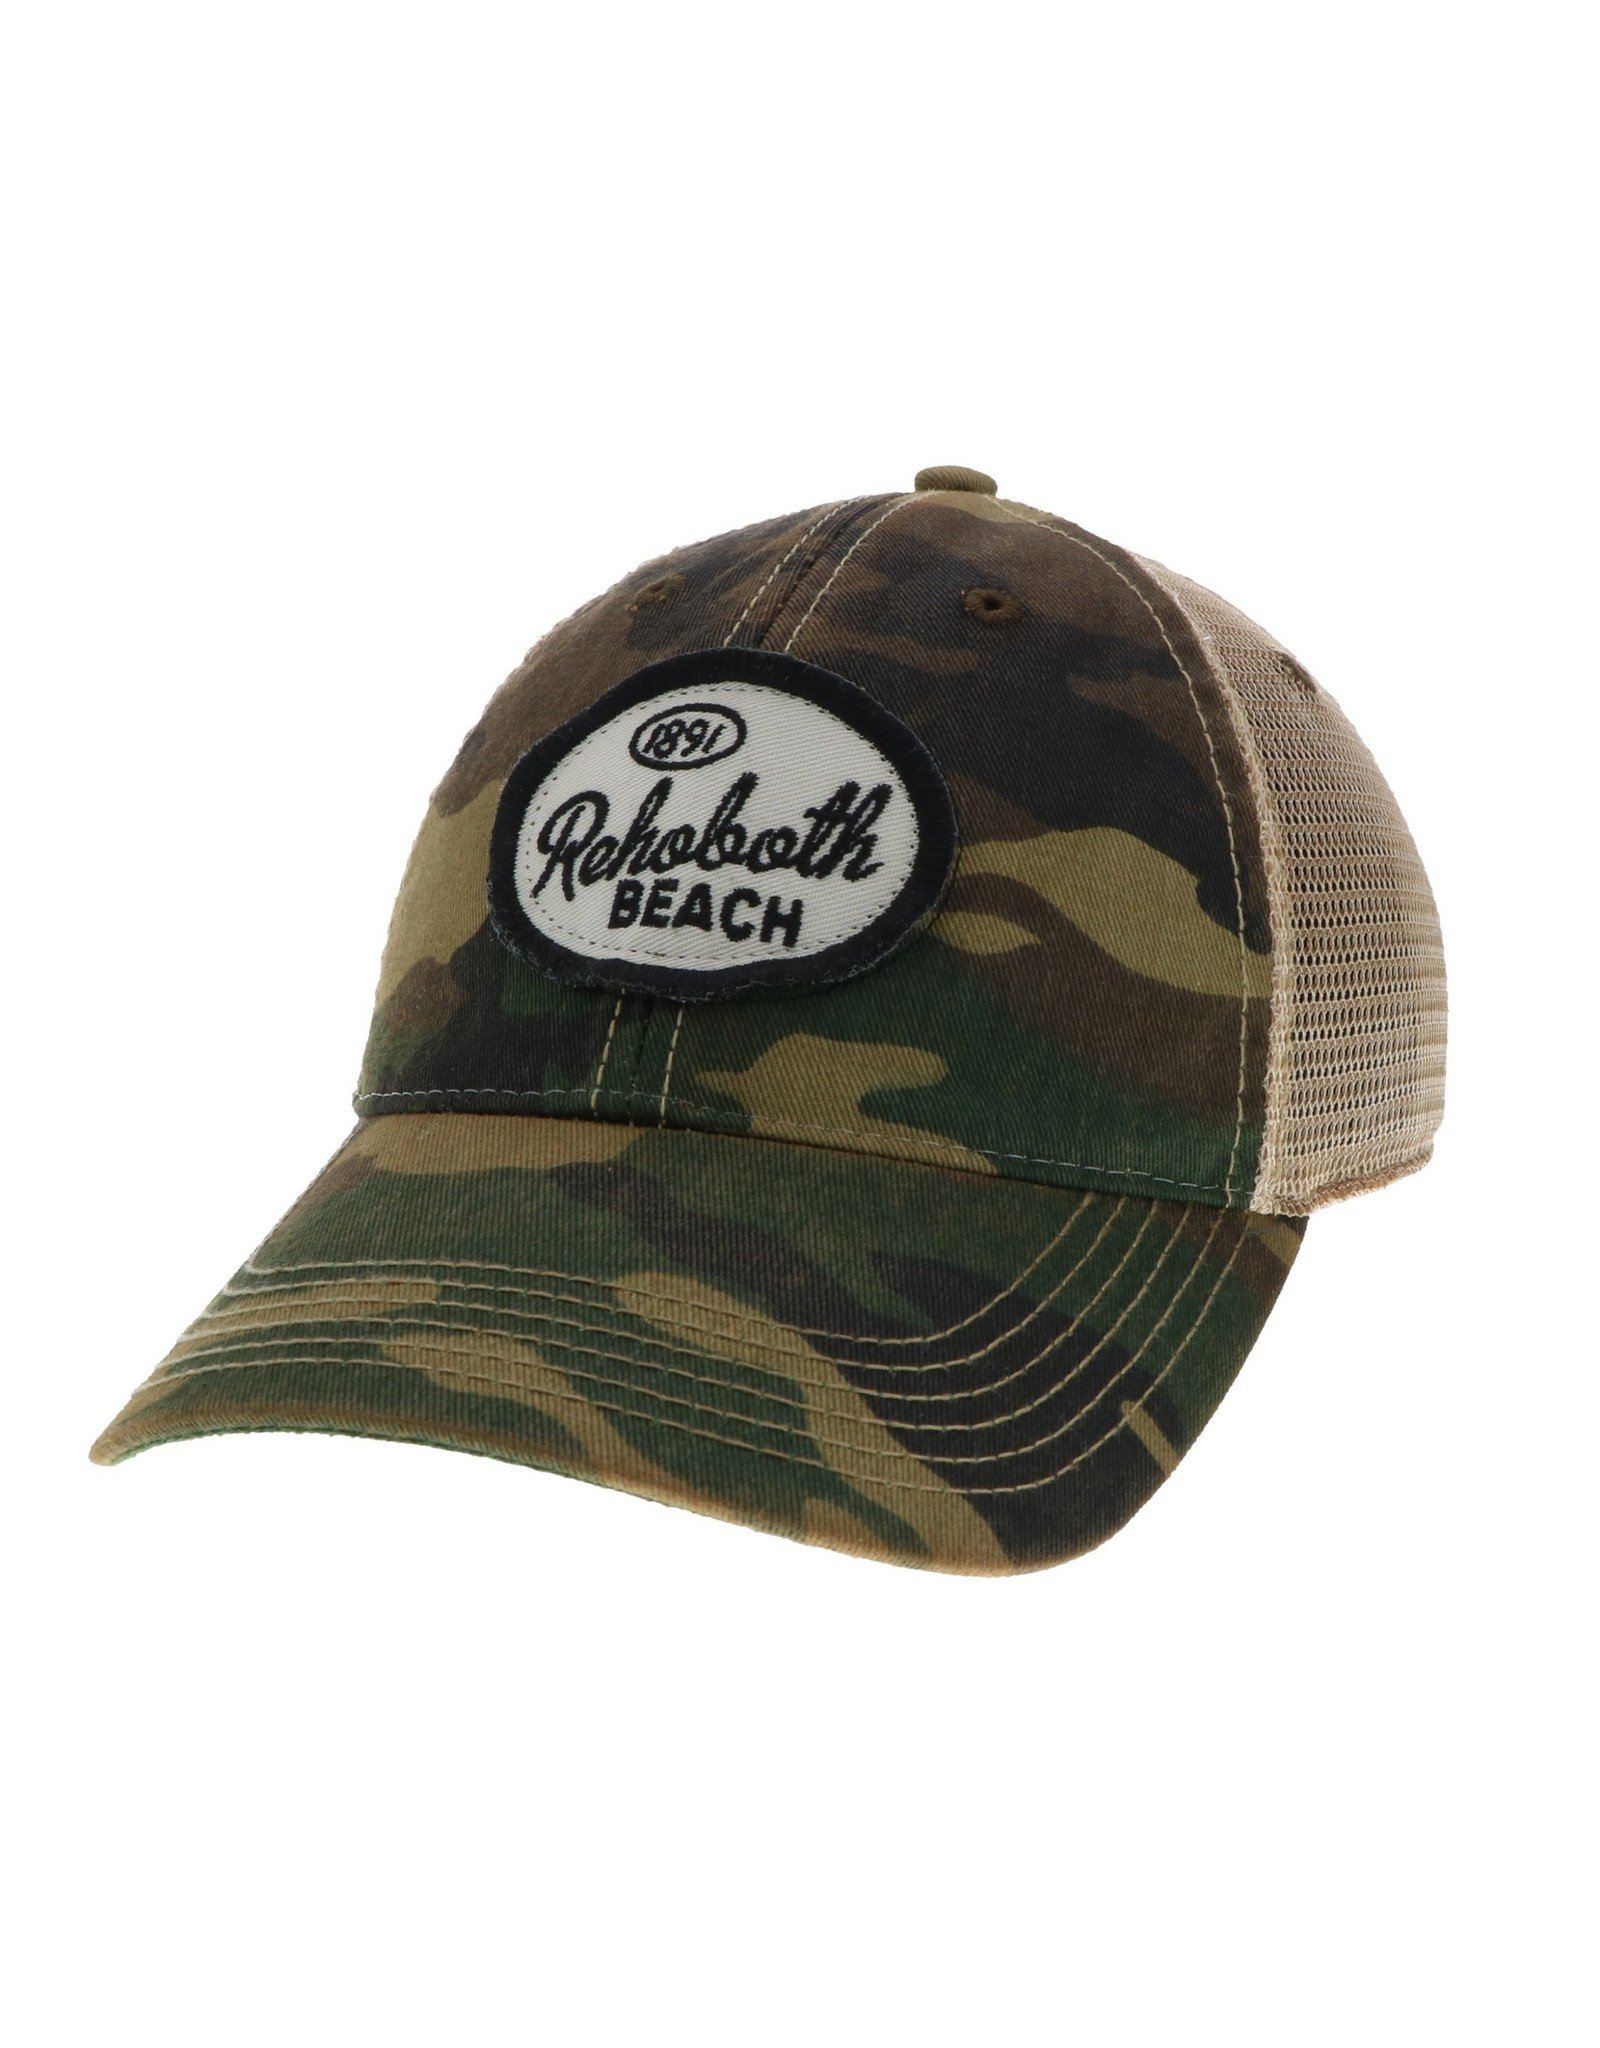 LEGACY ATHLETICS LEGACY OLD FAVORITE TRUCKER HAT ARMY CAMO SPANKY OVAL